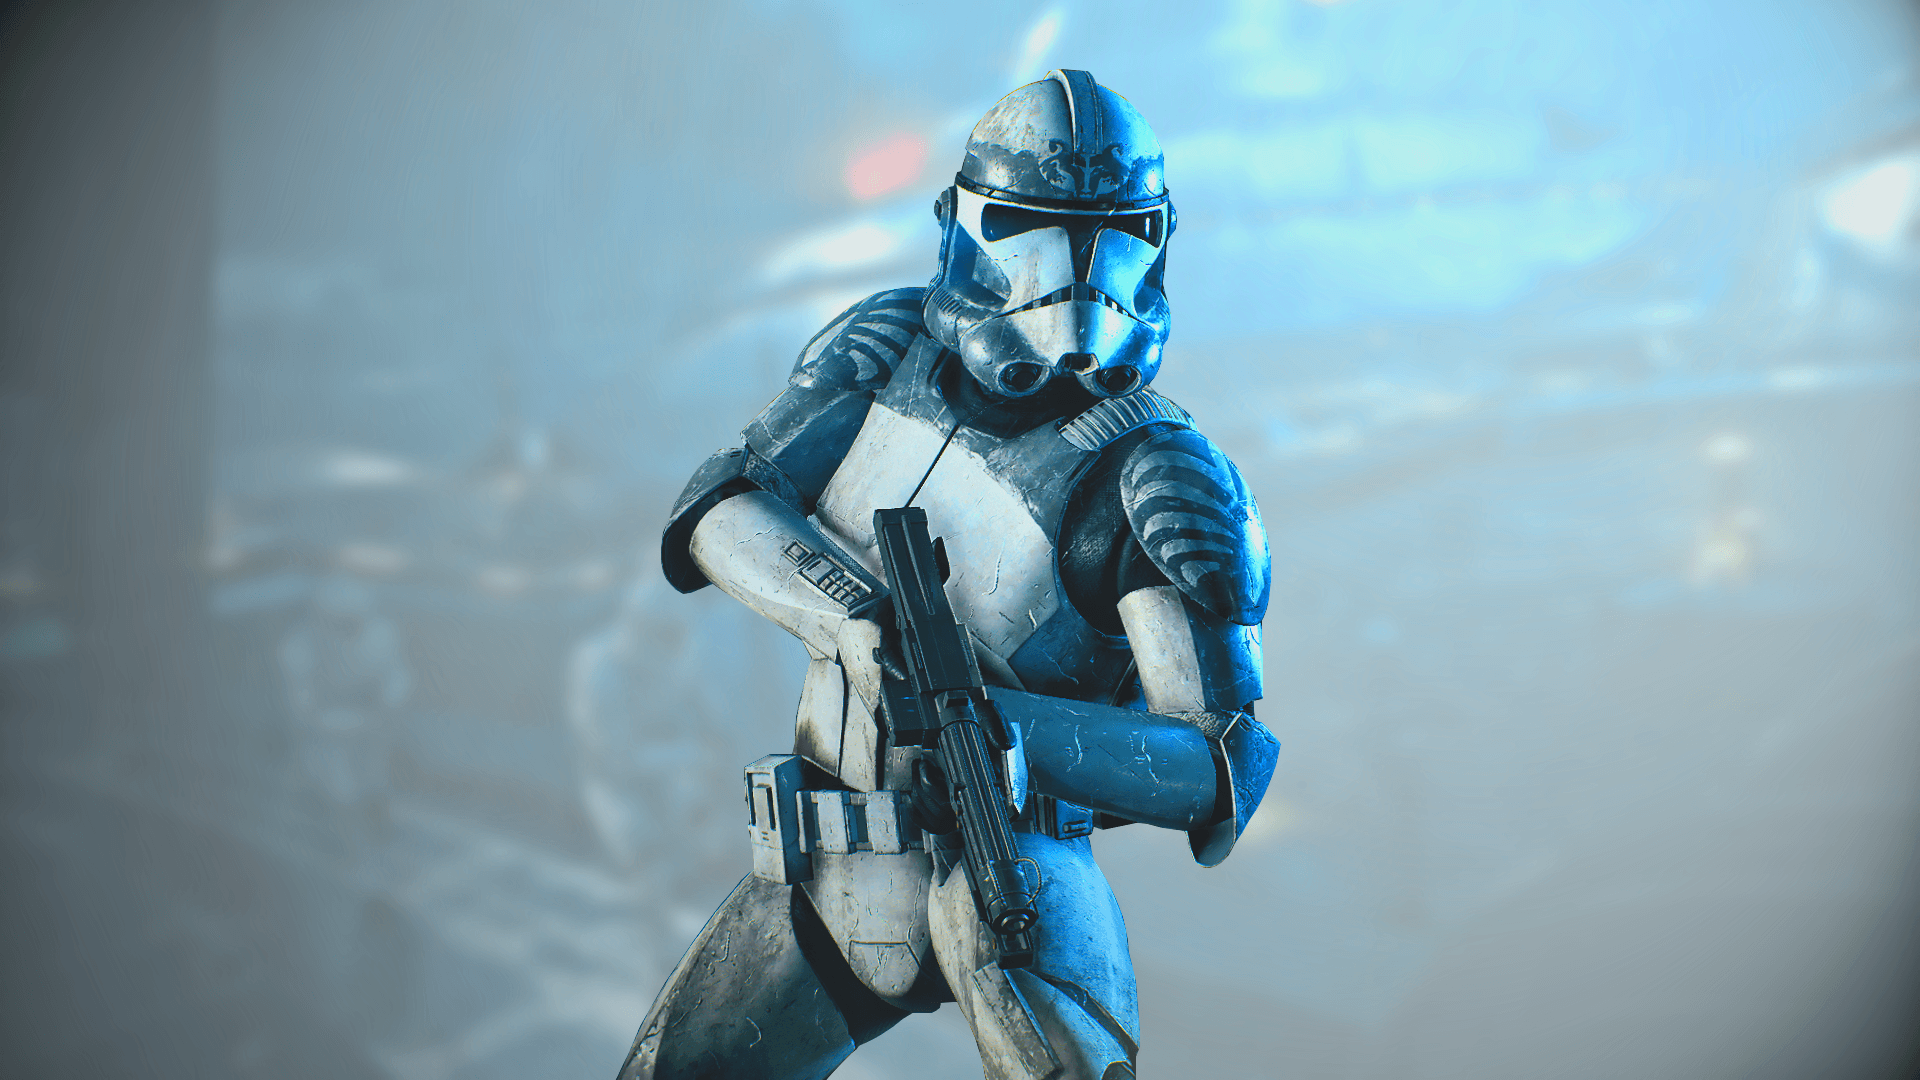 clone trooper 1080P 2k 4k Full HD Wallpapers Backgrounds Free Download   Wallpaper Crafter